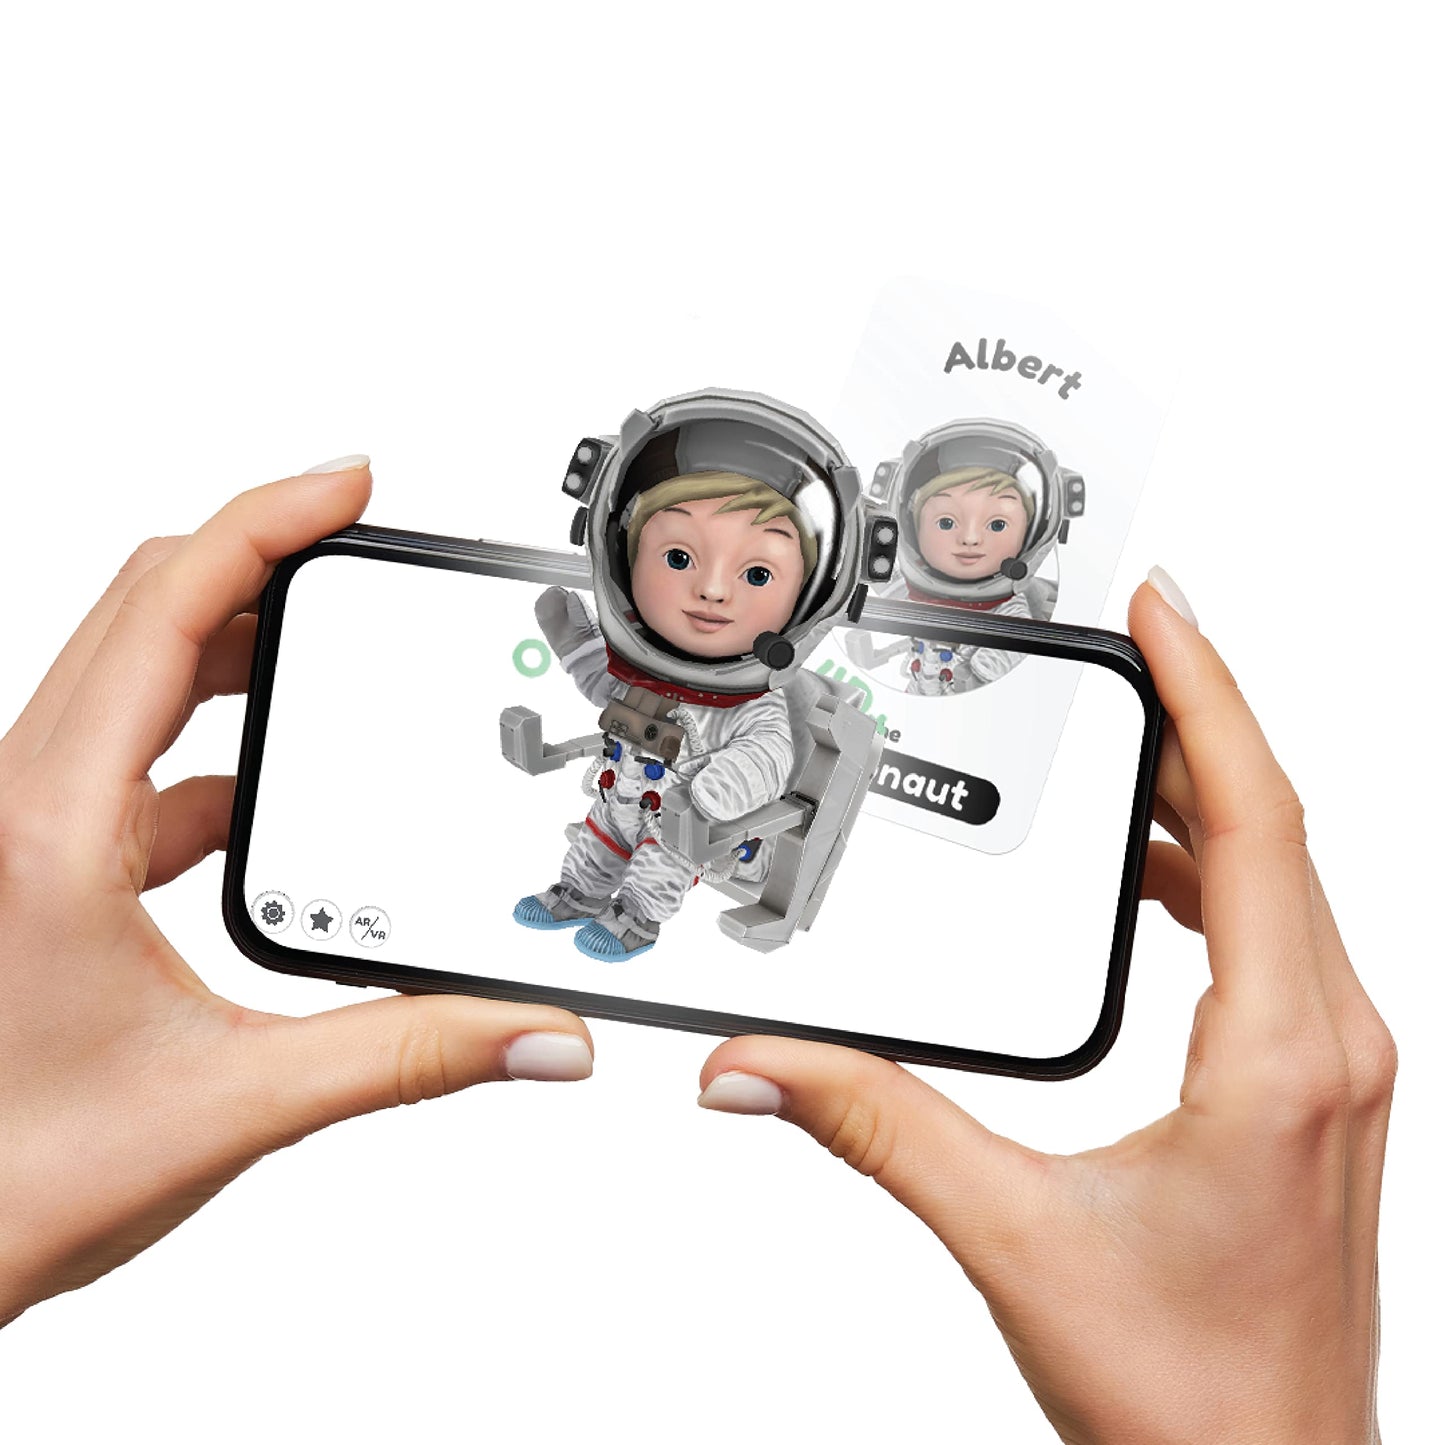 Octaland 4D+ Flashcards for Kids - Educational Alphabet Cards with Augmented Reality (AR) for Language Learning in 17 Languages - ARVRedtech.com | AR & VR Education Technology